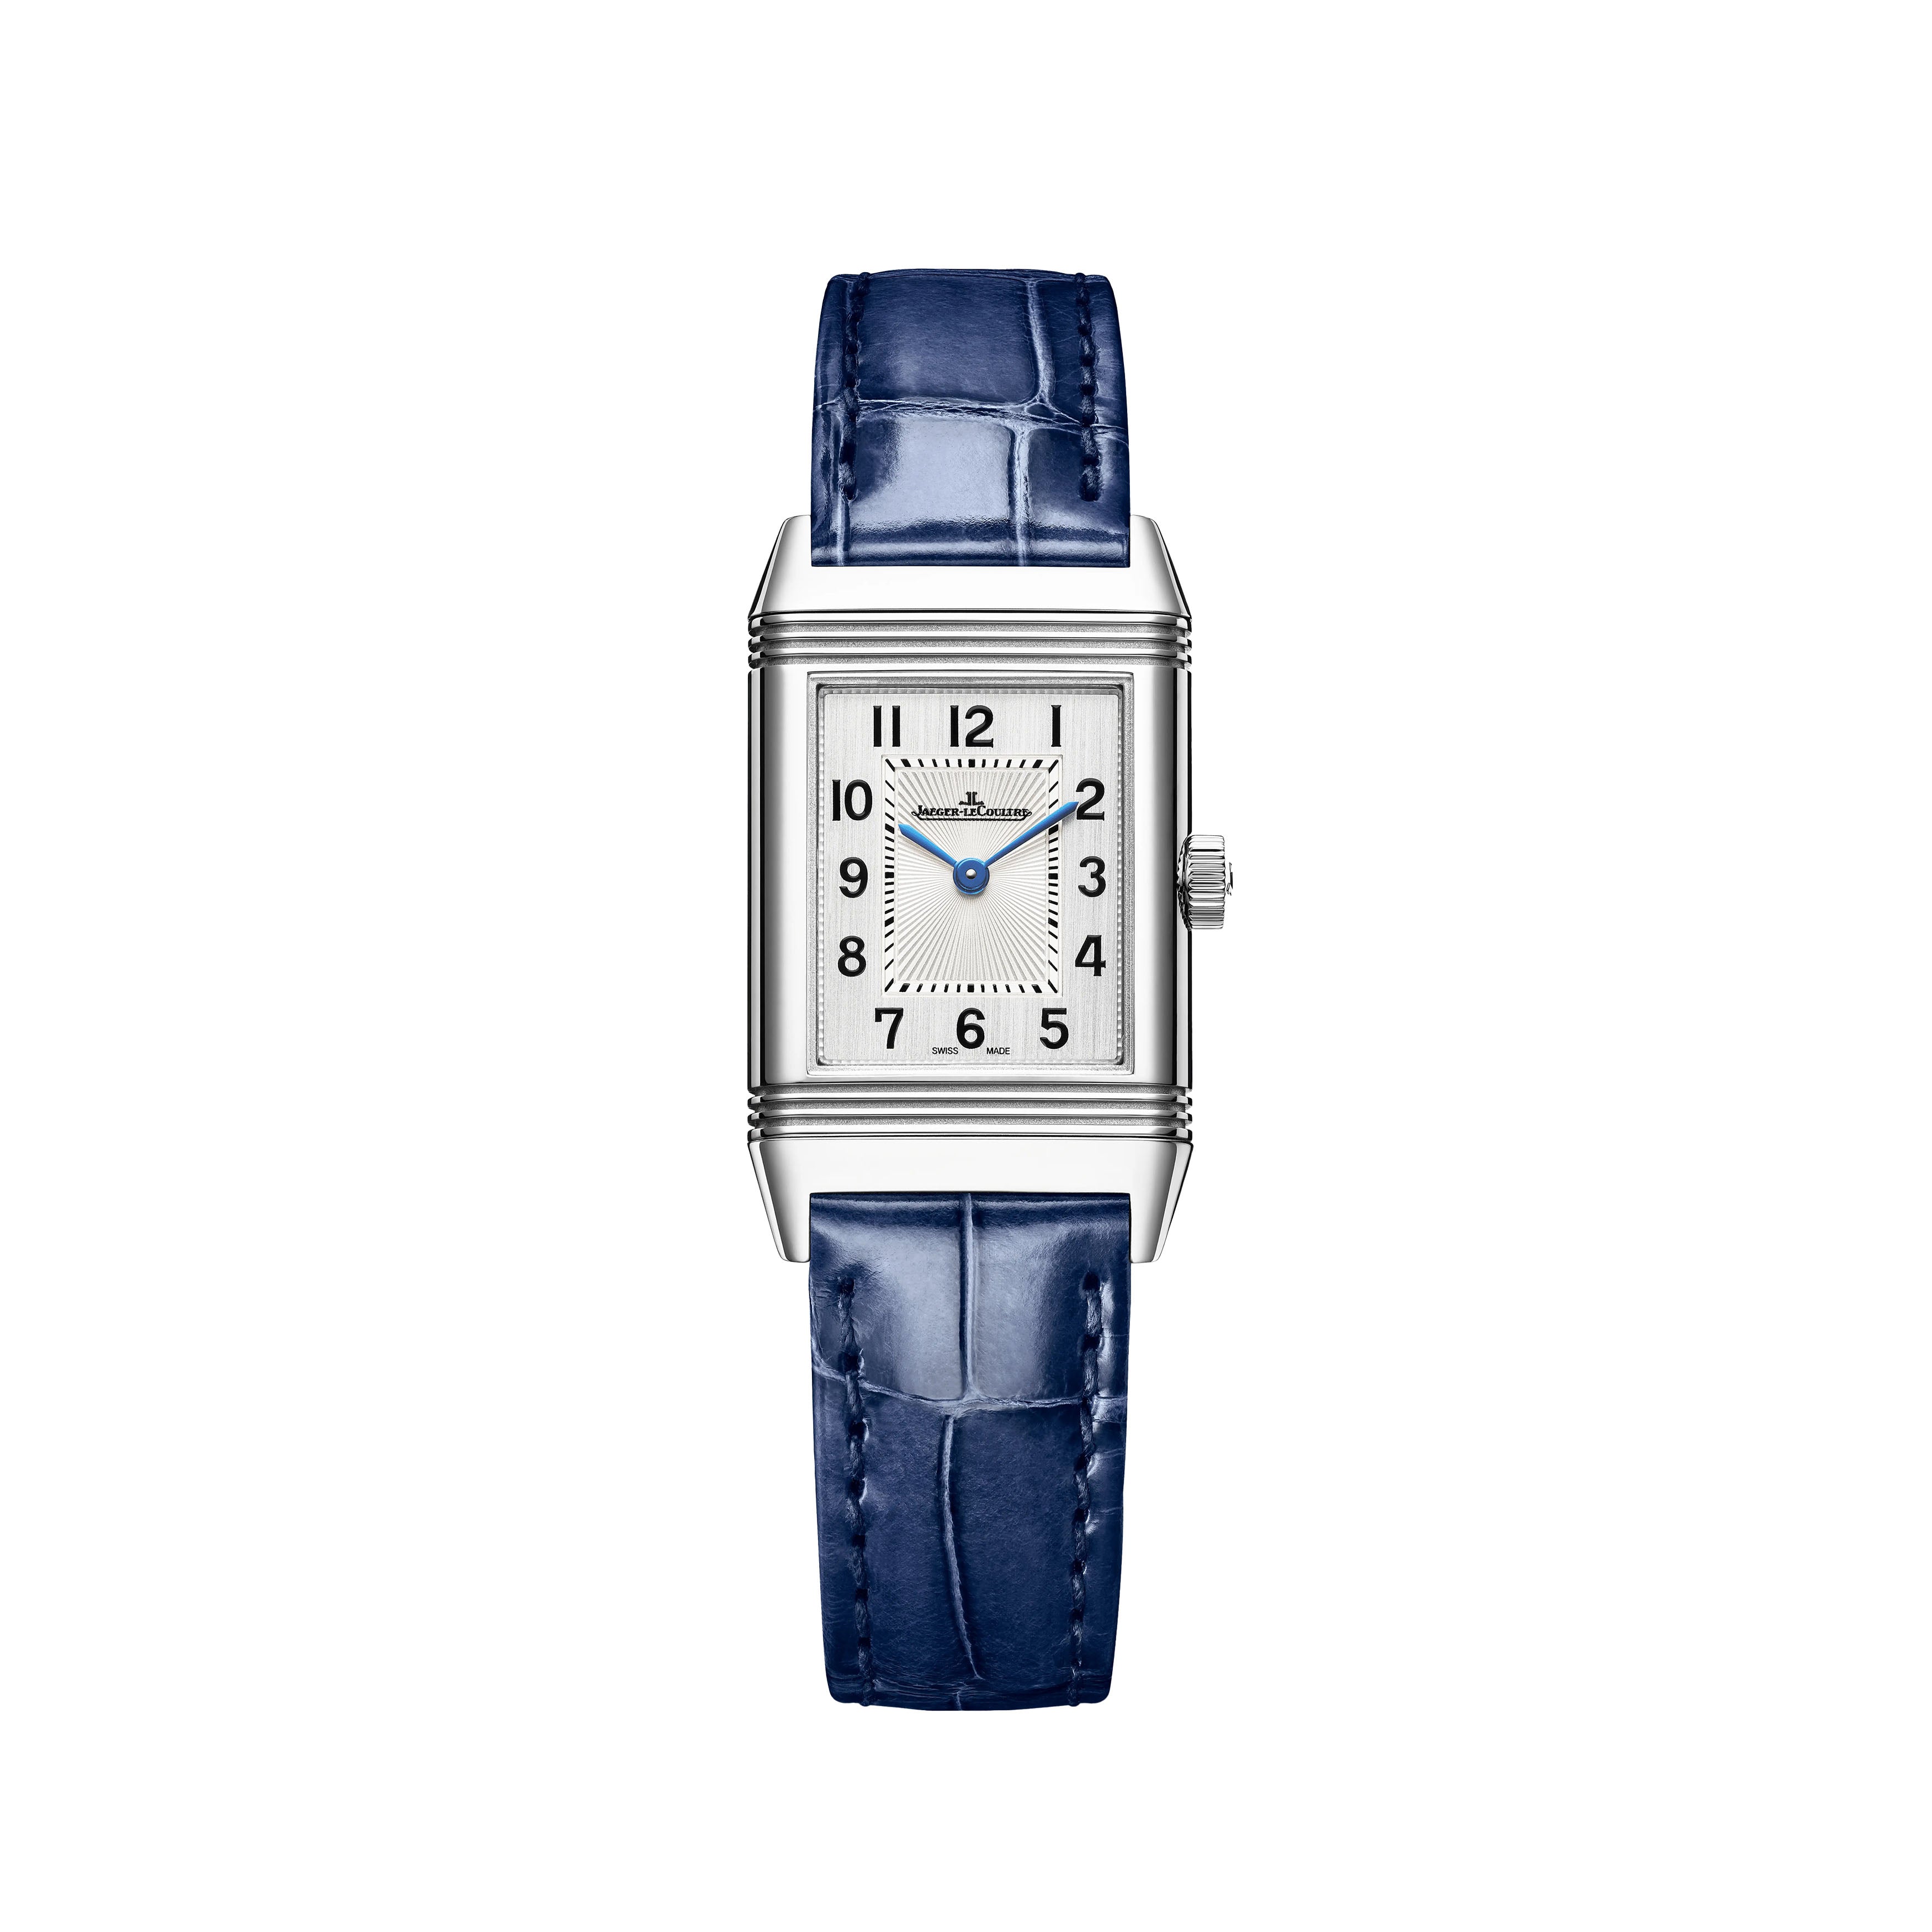 Jaeger-LeCoultre Reverso Classic Monoface Watch, 35.78x21mm Silver Dial, Q2608440